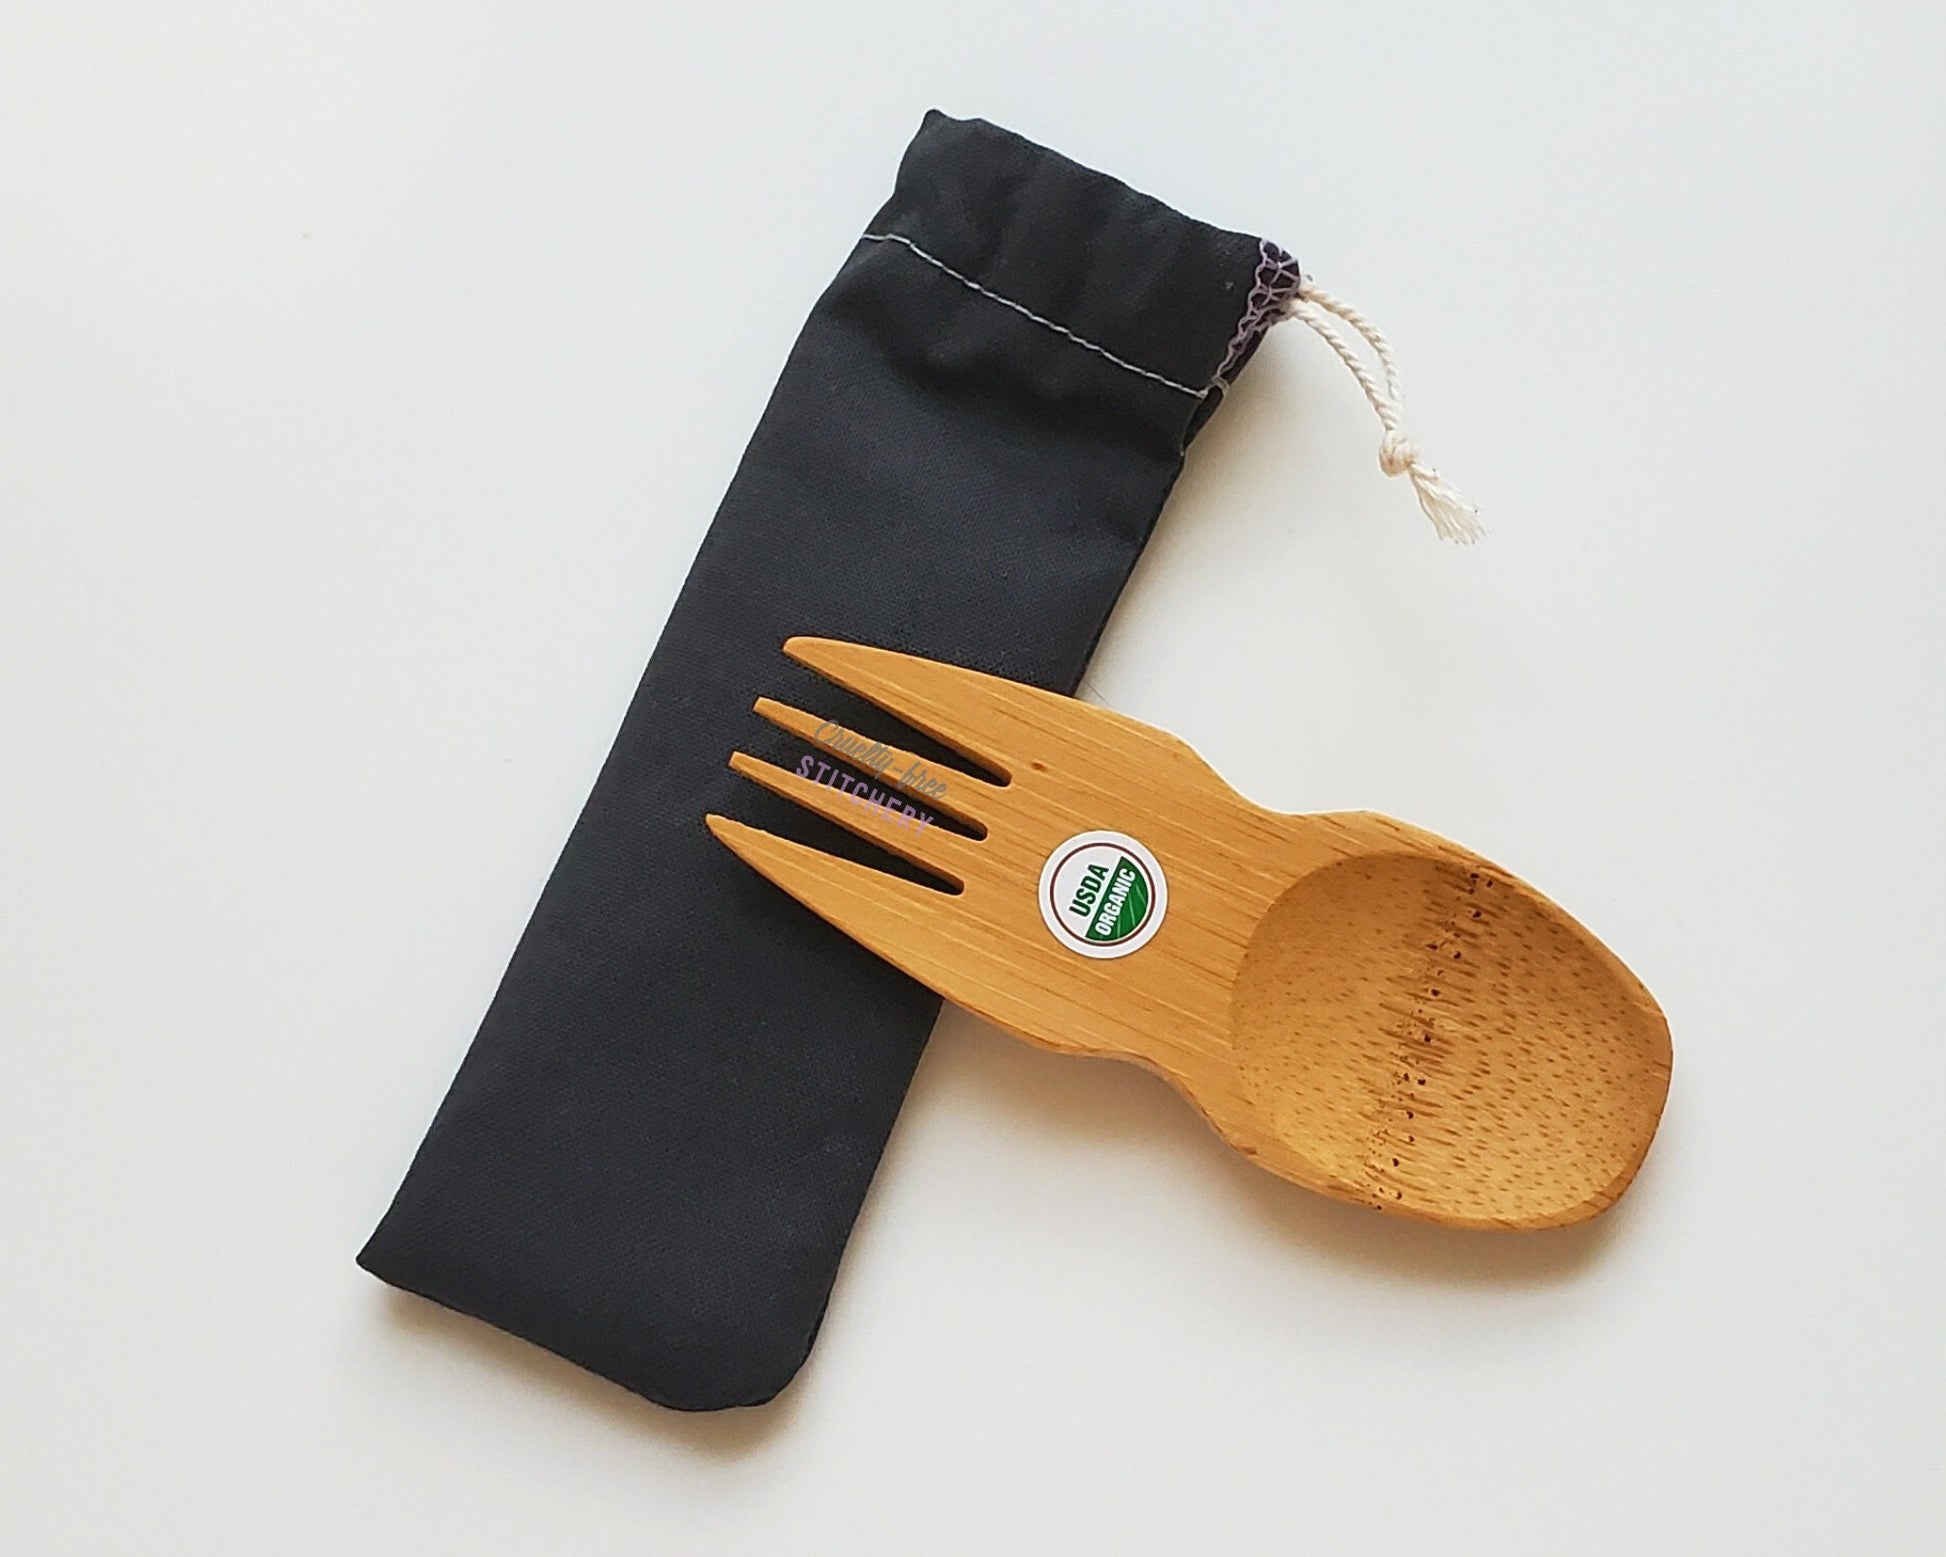 Solid black reusable spork pouch. The pouch is sitting diagonally with the spork partially on top pointing the other way. The fork end of the spork is pointing to the left.